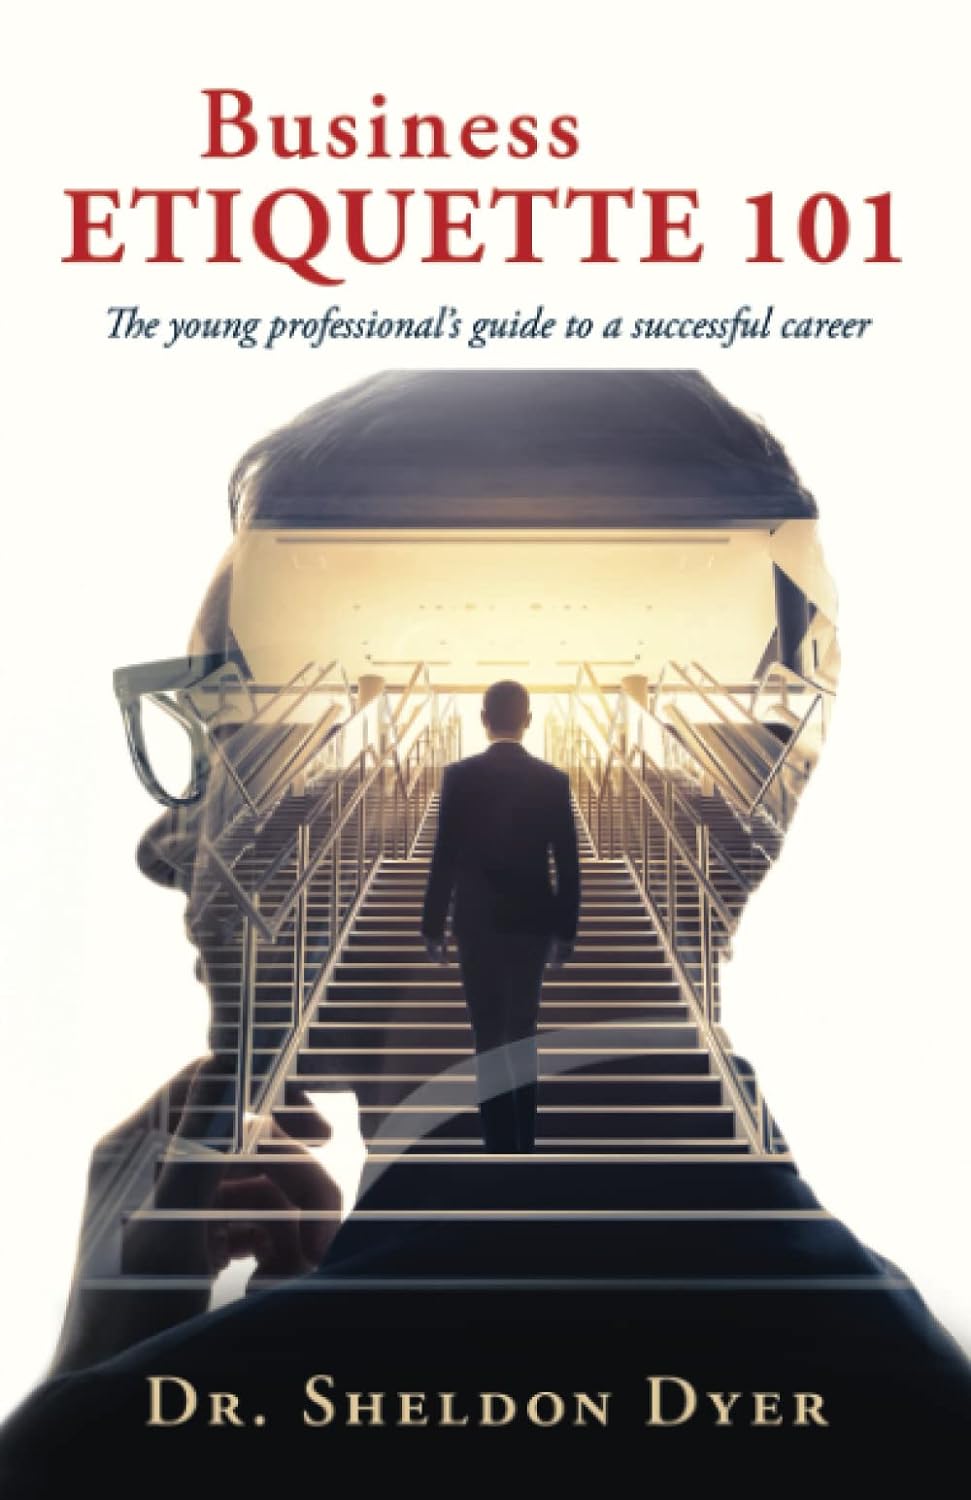 Business Etiquette 101 The Young Professional's Guide to a Successful Career - SureShot Books Publishing LLC